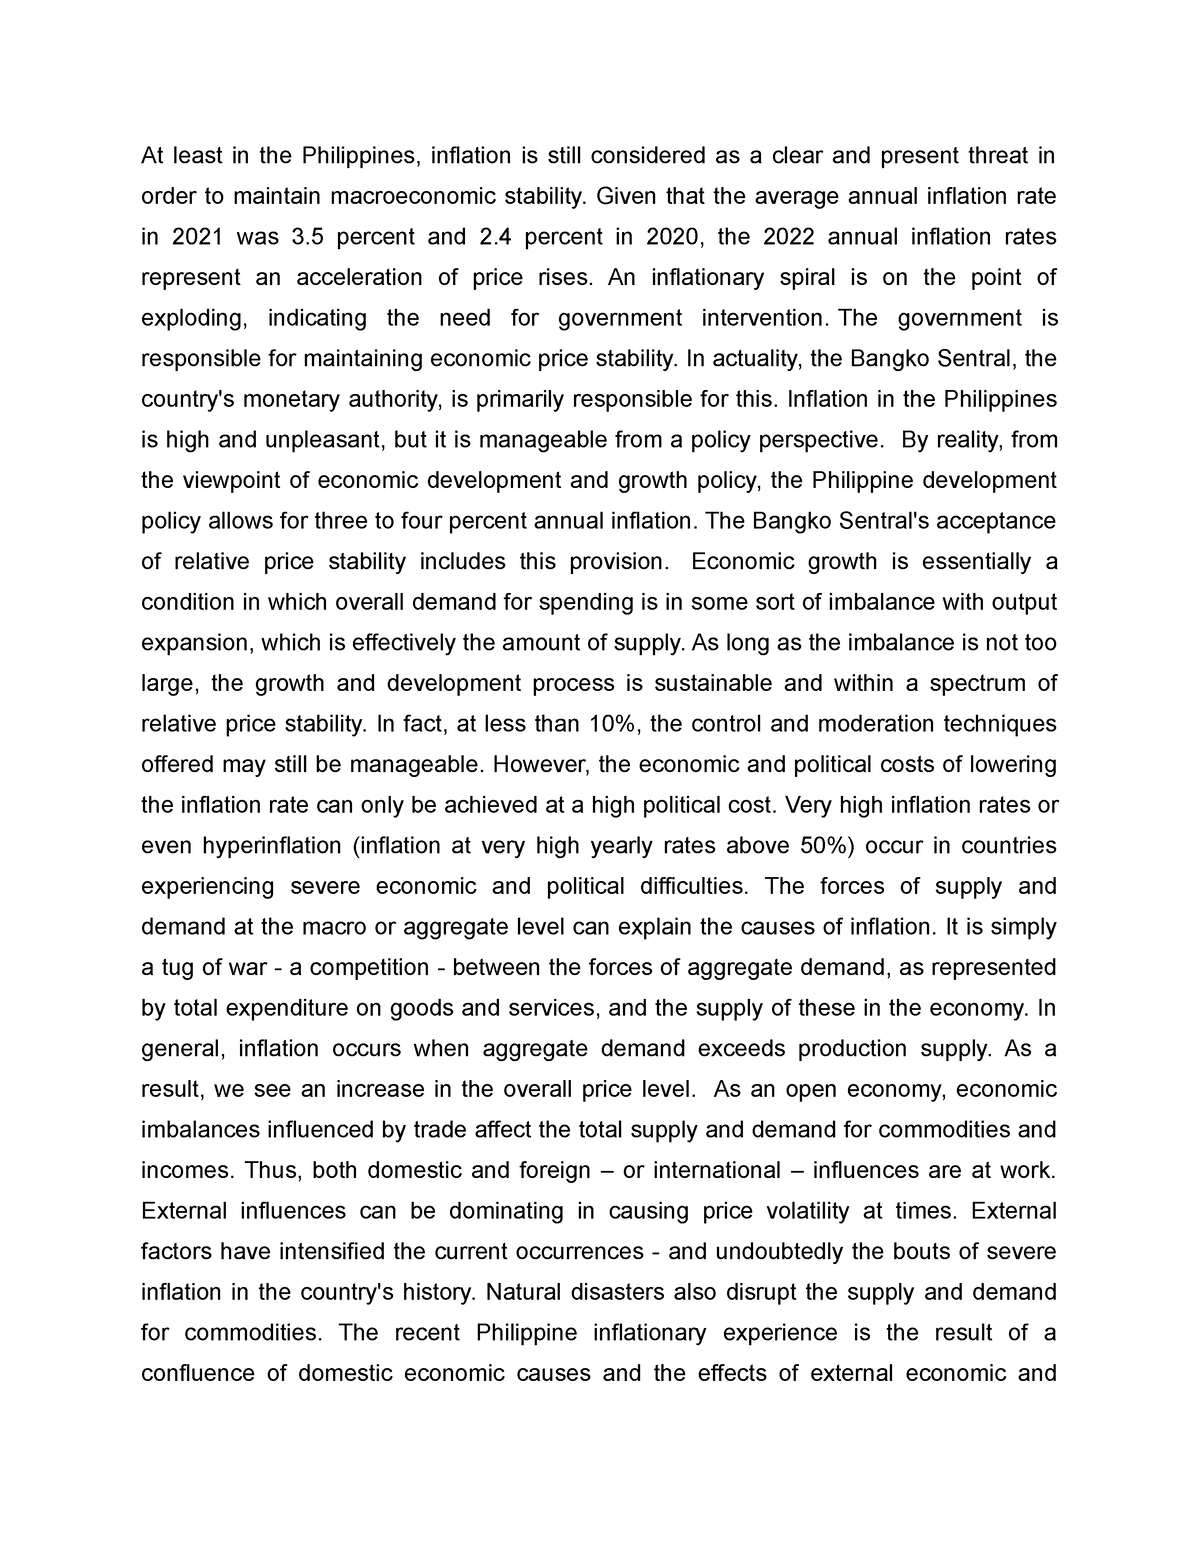 essay about inflation in philippines